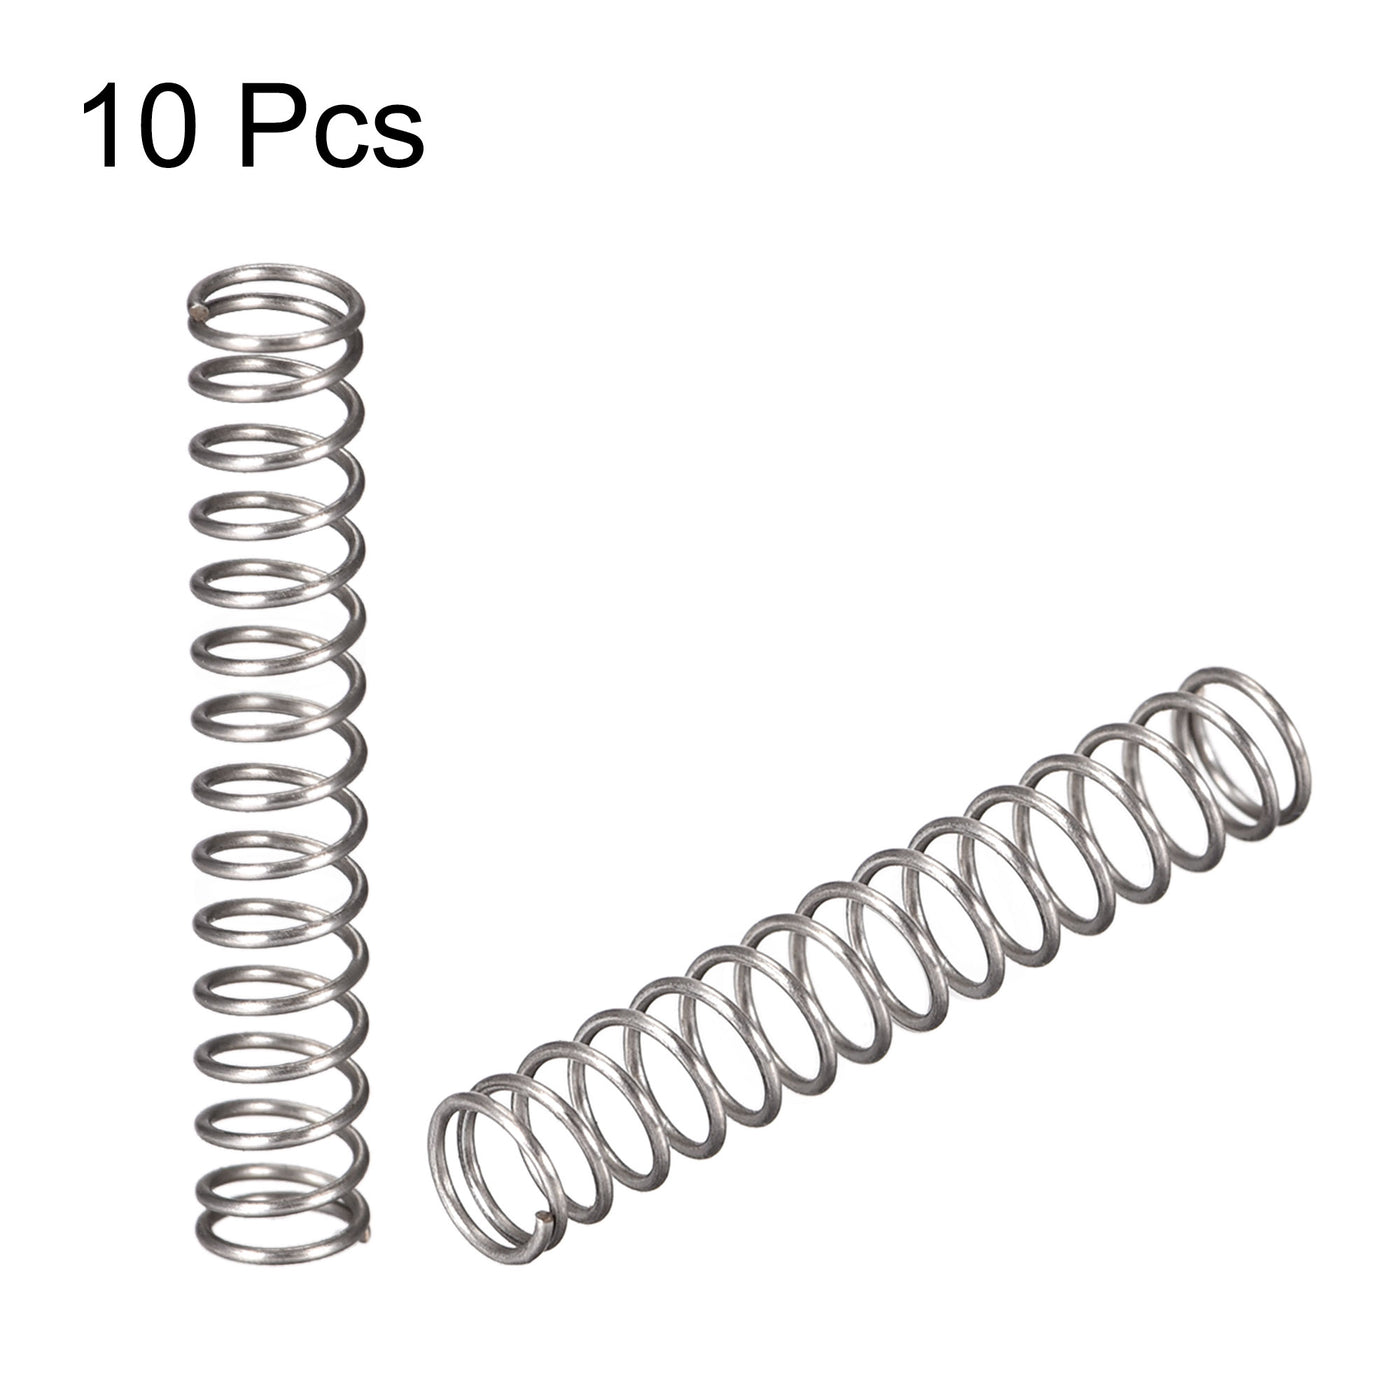 uxcell Uxcell Compressed Spring,4mmx0.4mmx25mm Free Length,7.1N Load Capacity,Gray,10pcs